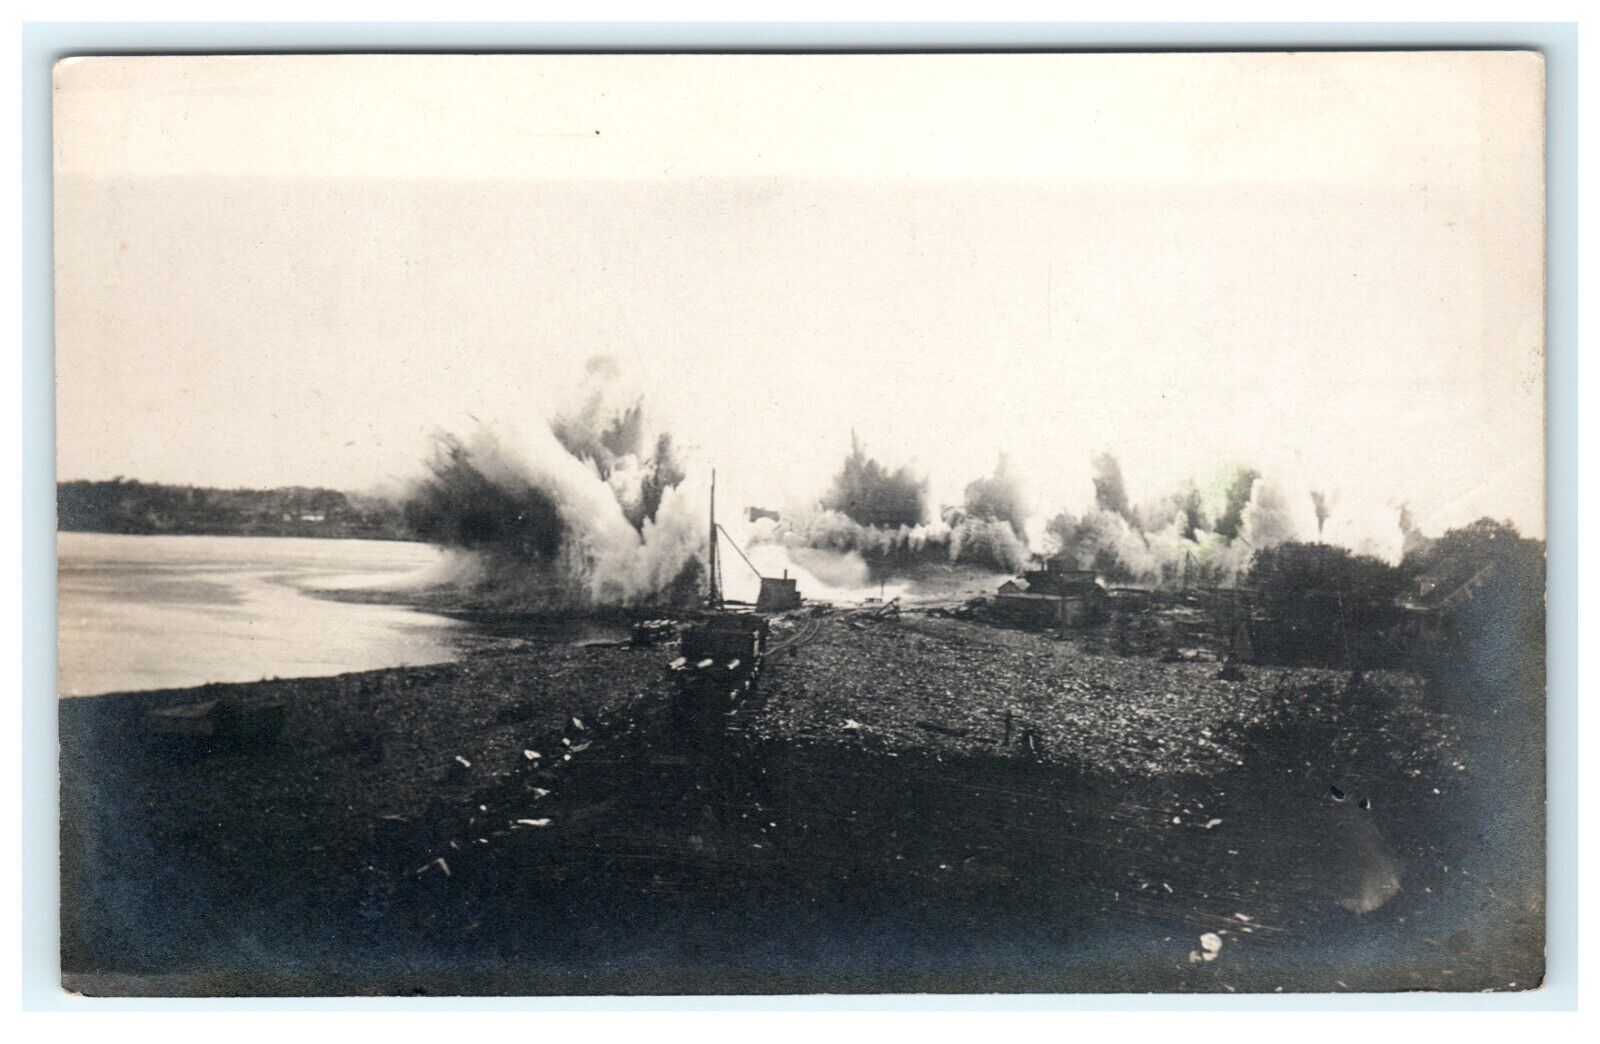 Large Explosion In Water Early RPPC Real Photo Postcard